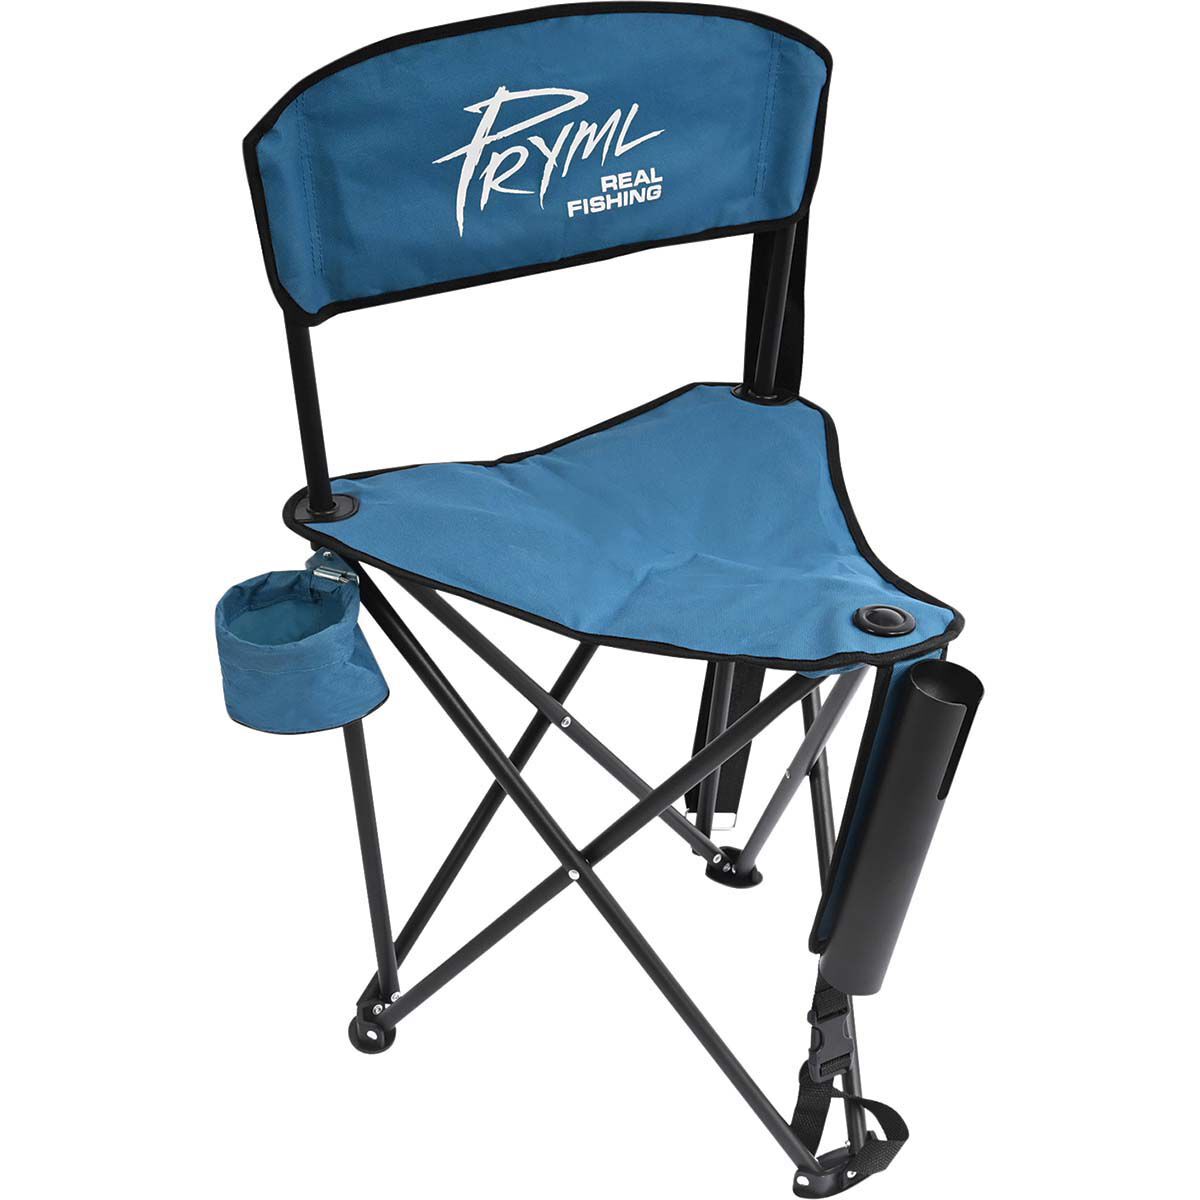 Fishing Chair With Rod Holder Built In Cooler Hands Free Fishing Pole  Holder Storage Pouch Storage Bag For Fishing Accessories Full Size Portable, Fishing Chair Accessories